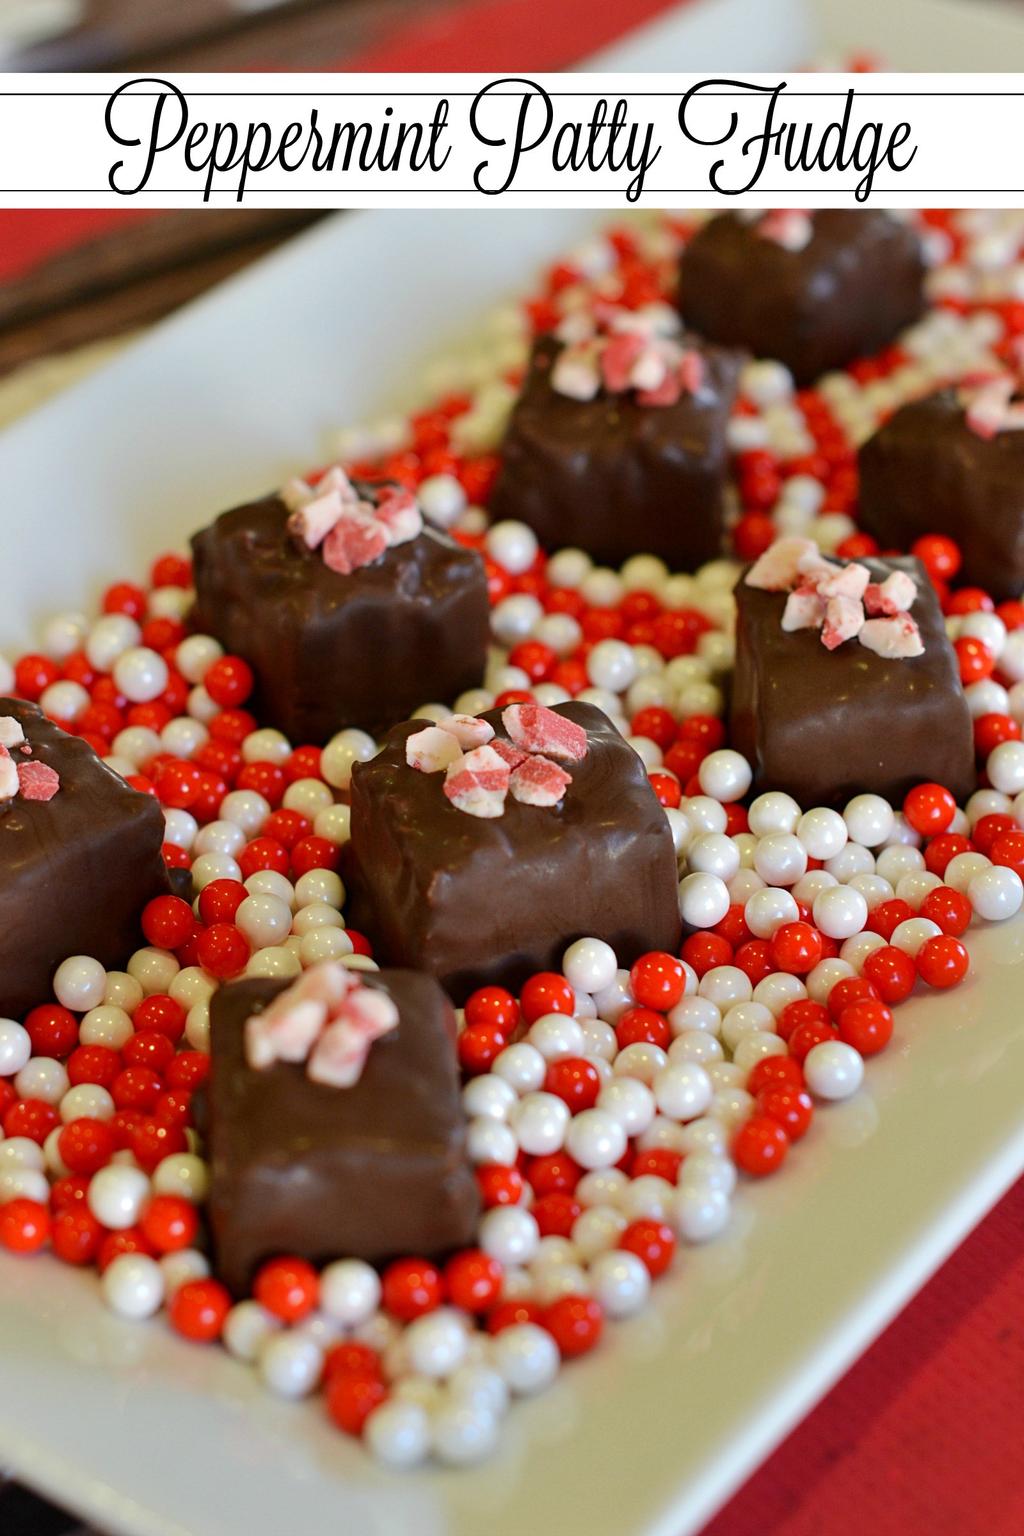 3 cups (12 ounce bag) white chocolate chips, softened 1¼ cups peppermint crunch baking chips 1 pound bag of Dark Chocolate candy melts optional: extra peppermint crunch baking chips as garnish Line